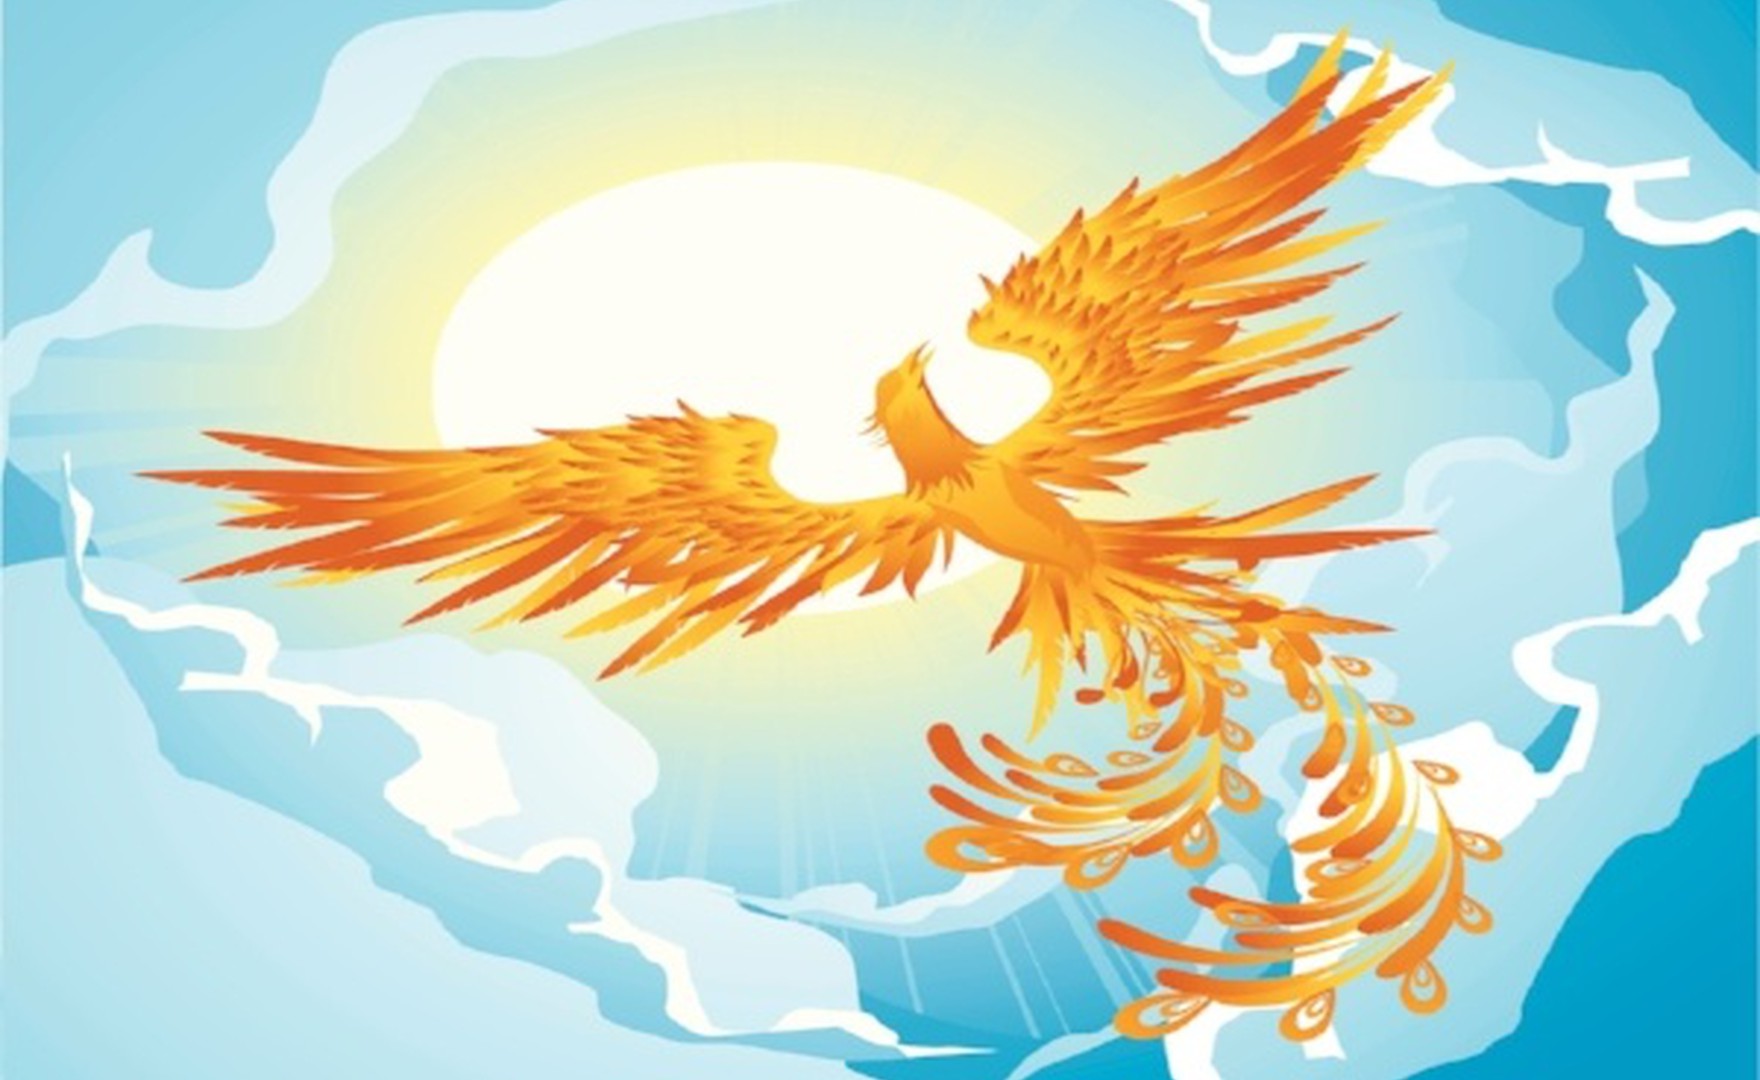 The Phoenix of Human Kindness and Compassion